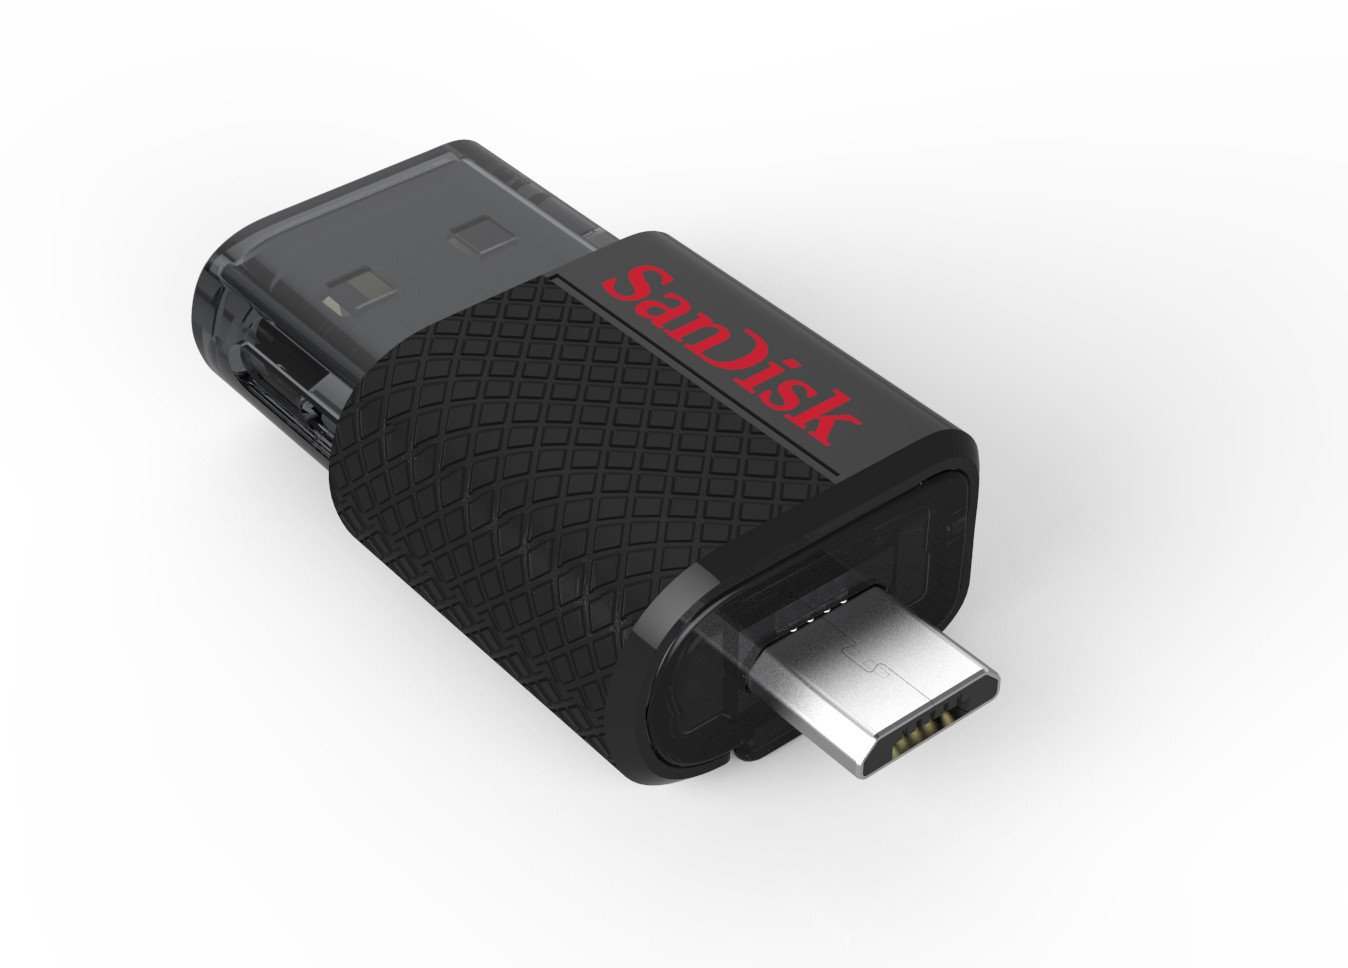 SanDisk 32GB Ultra Dual Drive Go 2-In-1 Usb-C & Usb-A Flash Drive Memory Stick 150MB/s Usb3.1 Type-C Swivel For Android Smartphones Tablets Macs PCs